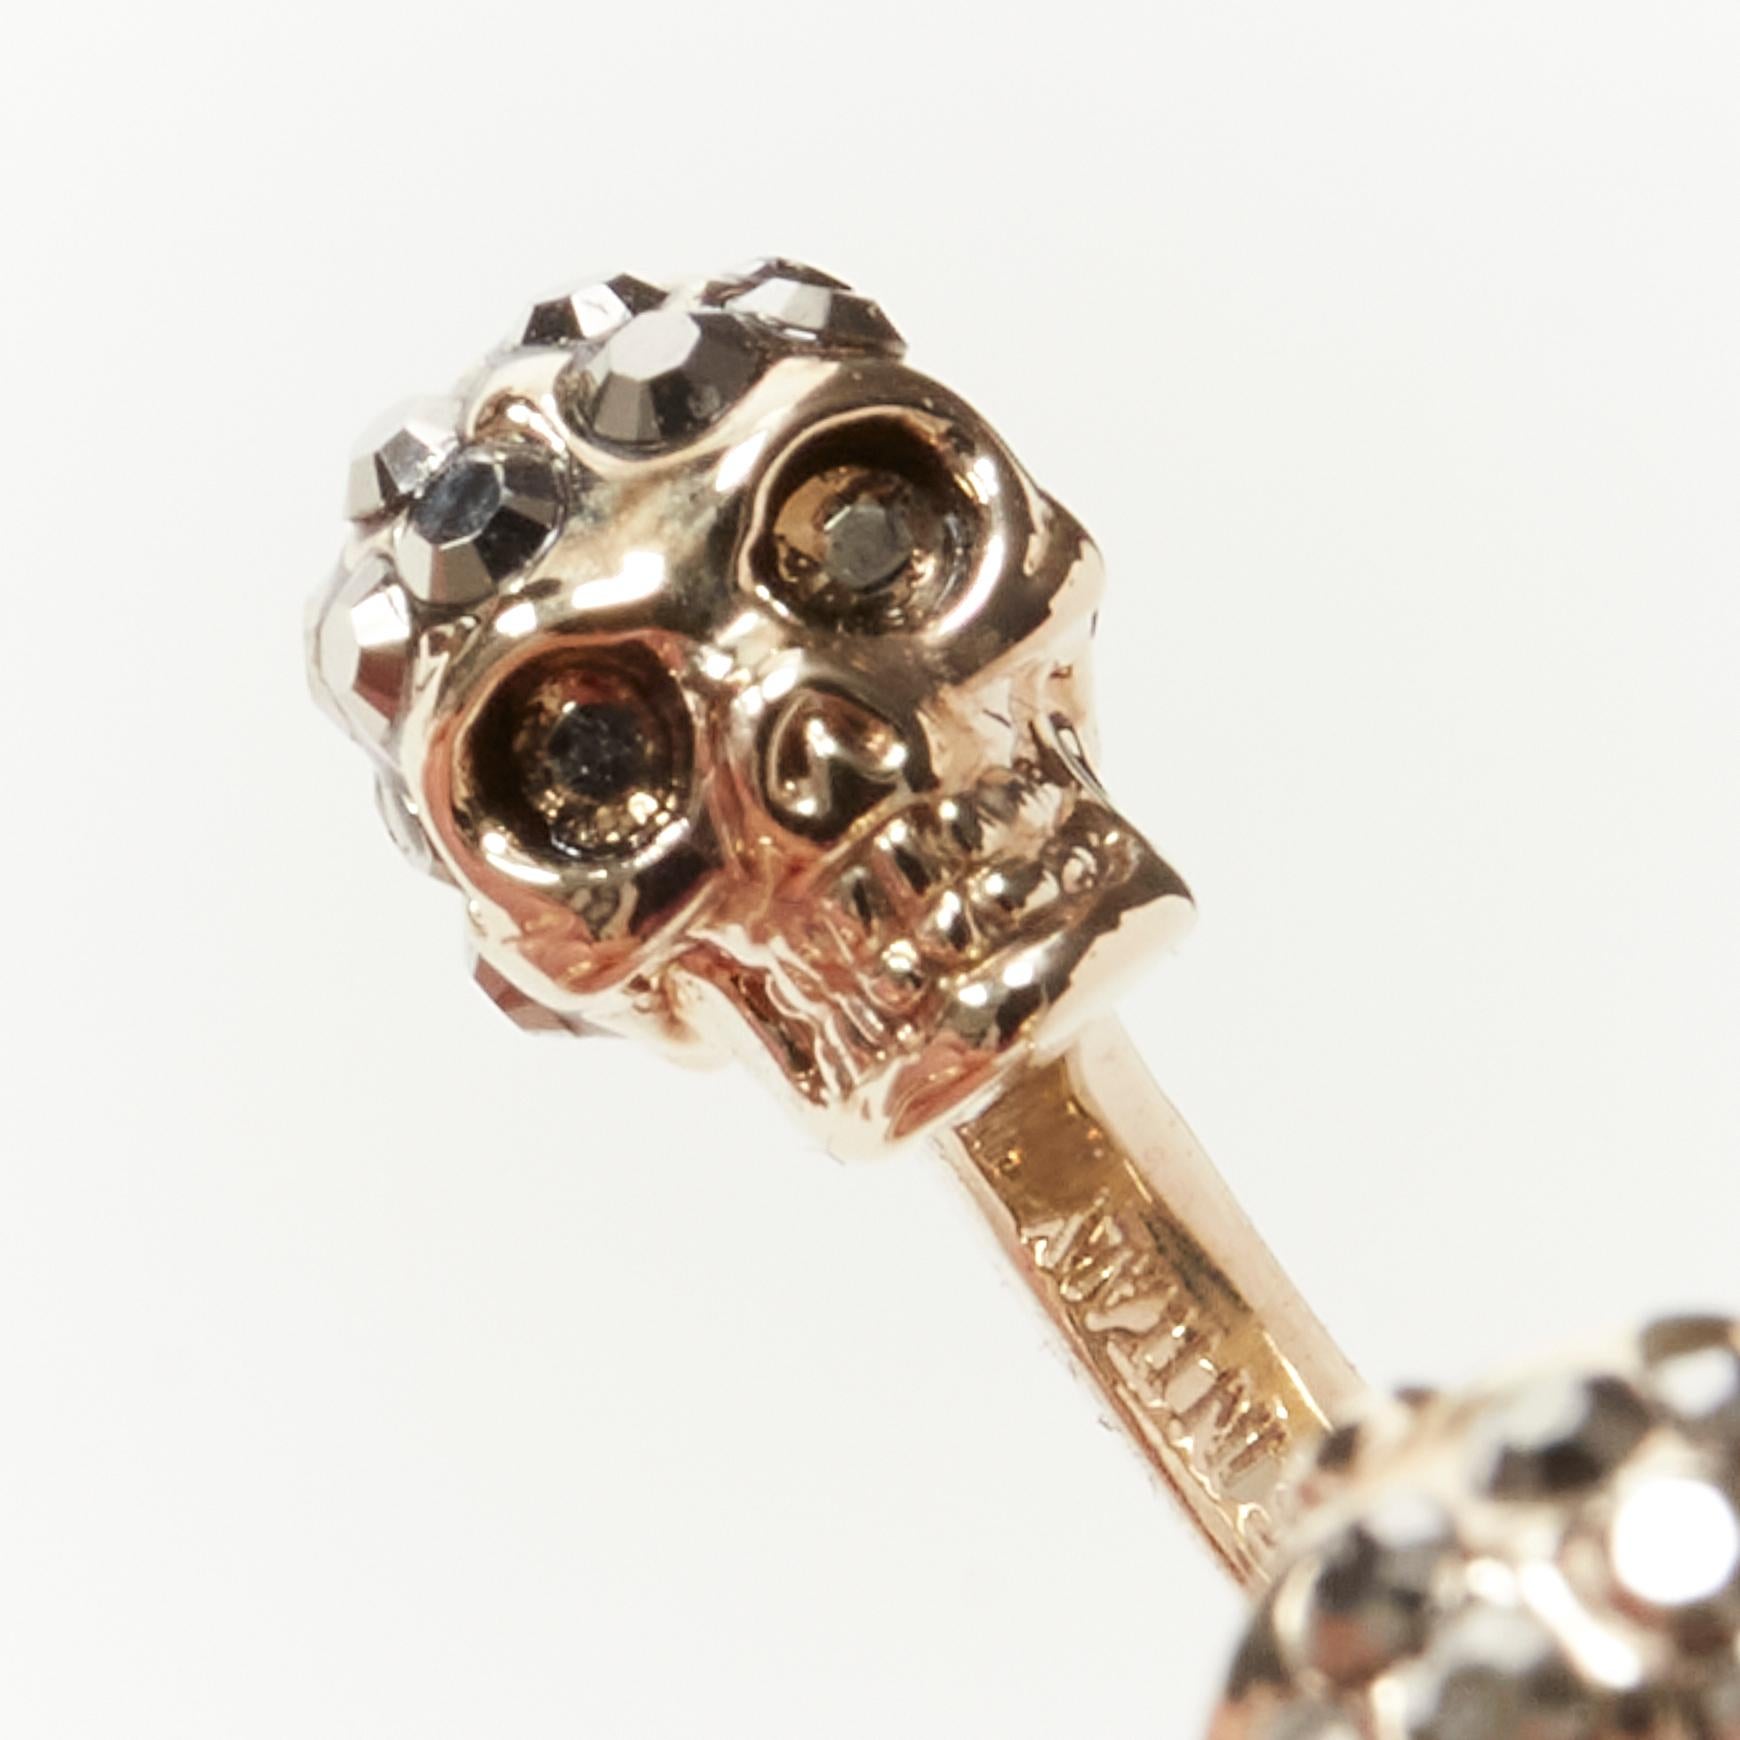 Gold ALEXANDER MCQUEEN crystal encrusted double skull gold tone double ring 6.5